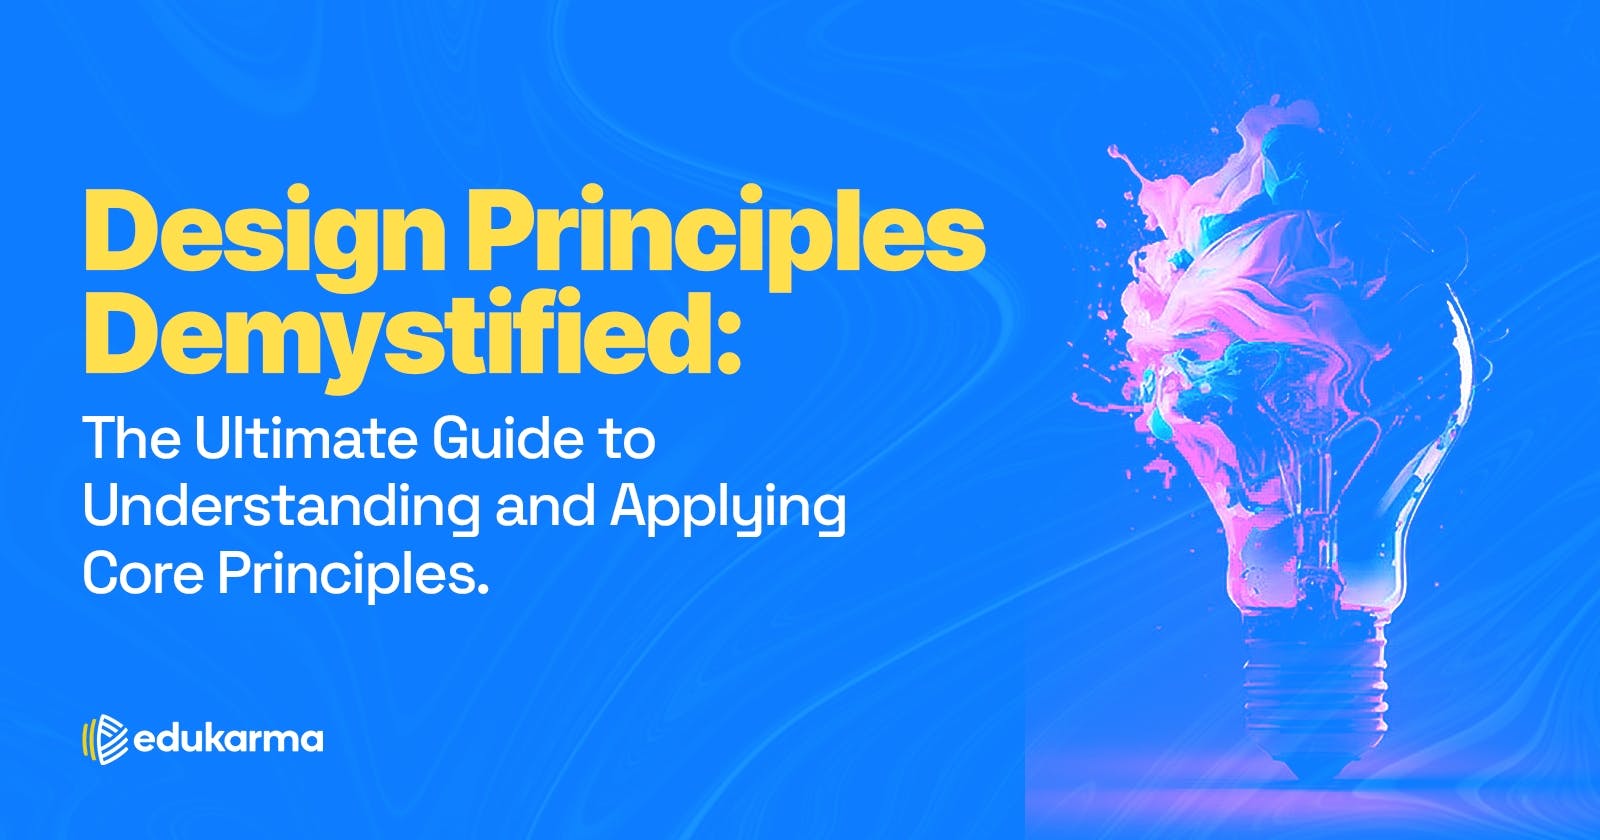 Design Principles Demystified: The Ultimate Guide to Understanding and Applying Core Principles